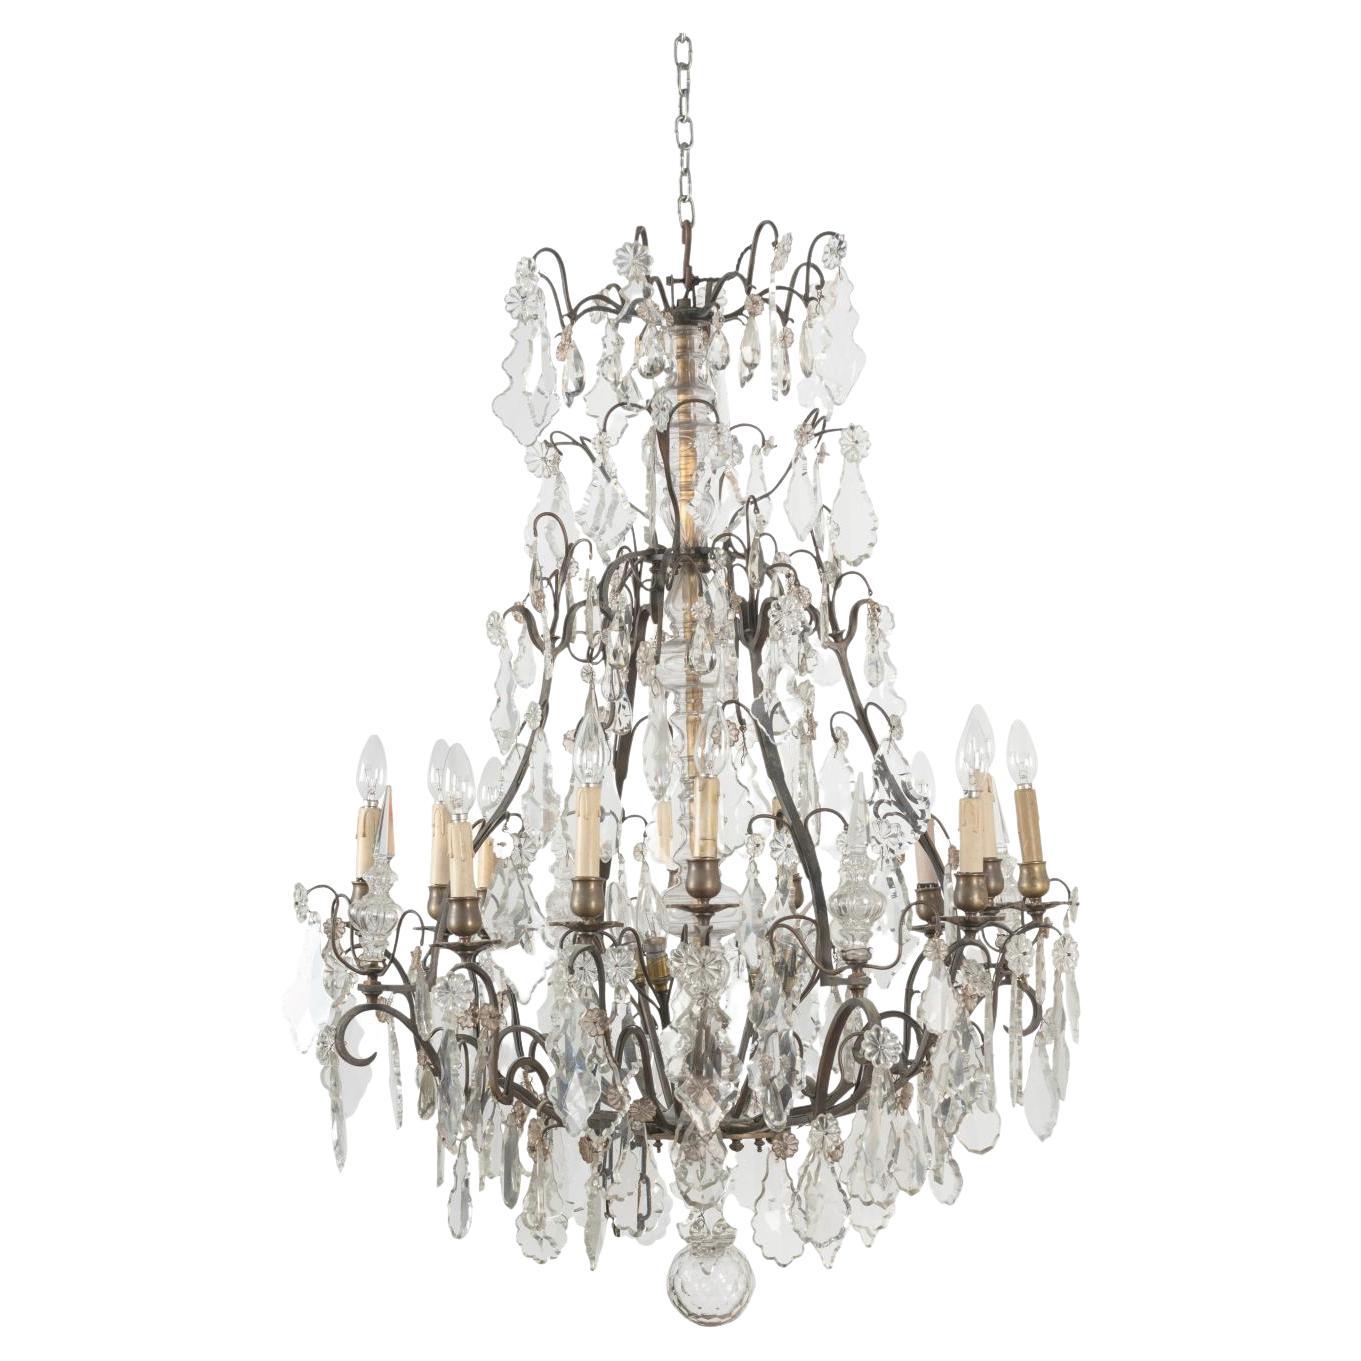 A Louis XV Style Cut Glass Chandelier, Late 19th Century / Early 20th Century For Sale